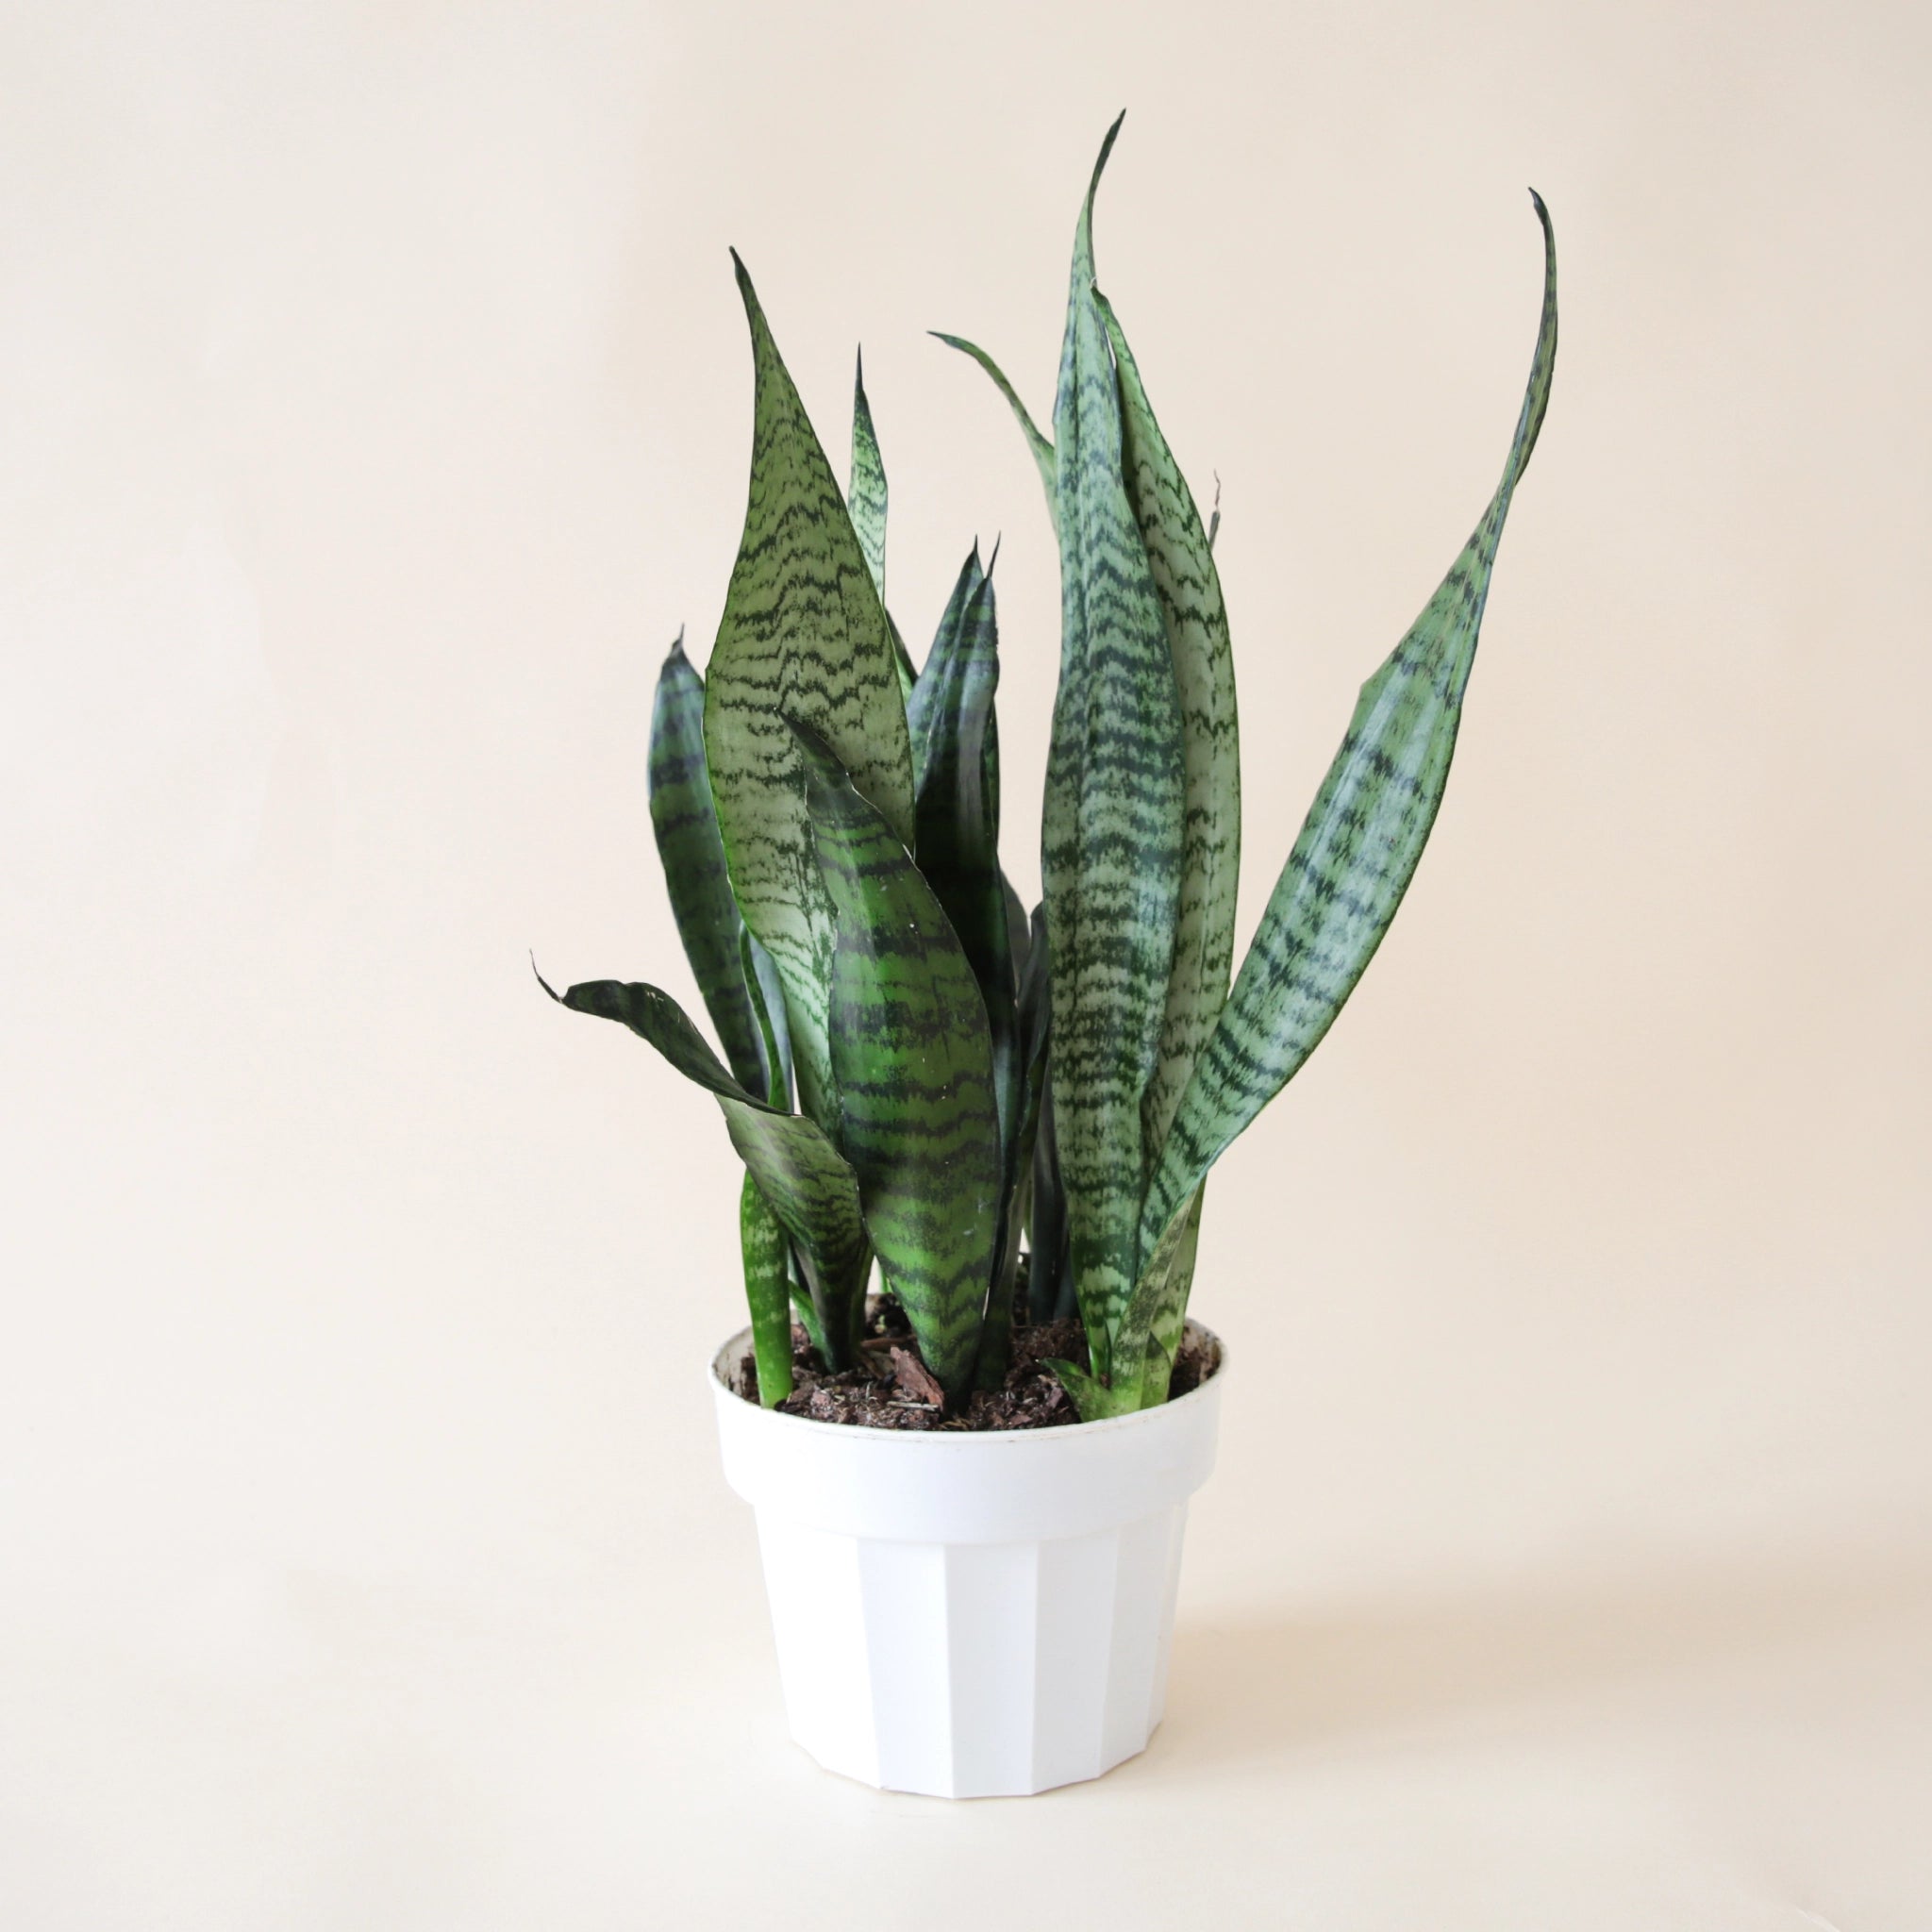 In front of white background is a plastic grow pot with a sansevieria inside. The plant has very tall, stiff leaves that are pointed at the top. The leaves are dark green with light green stripes and patterns